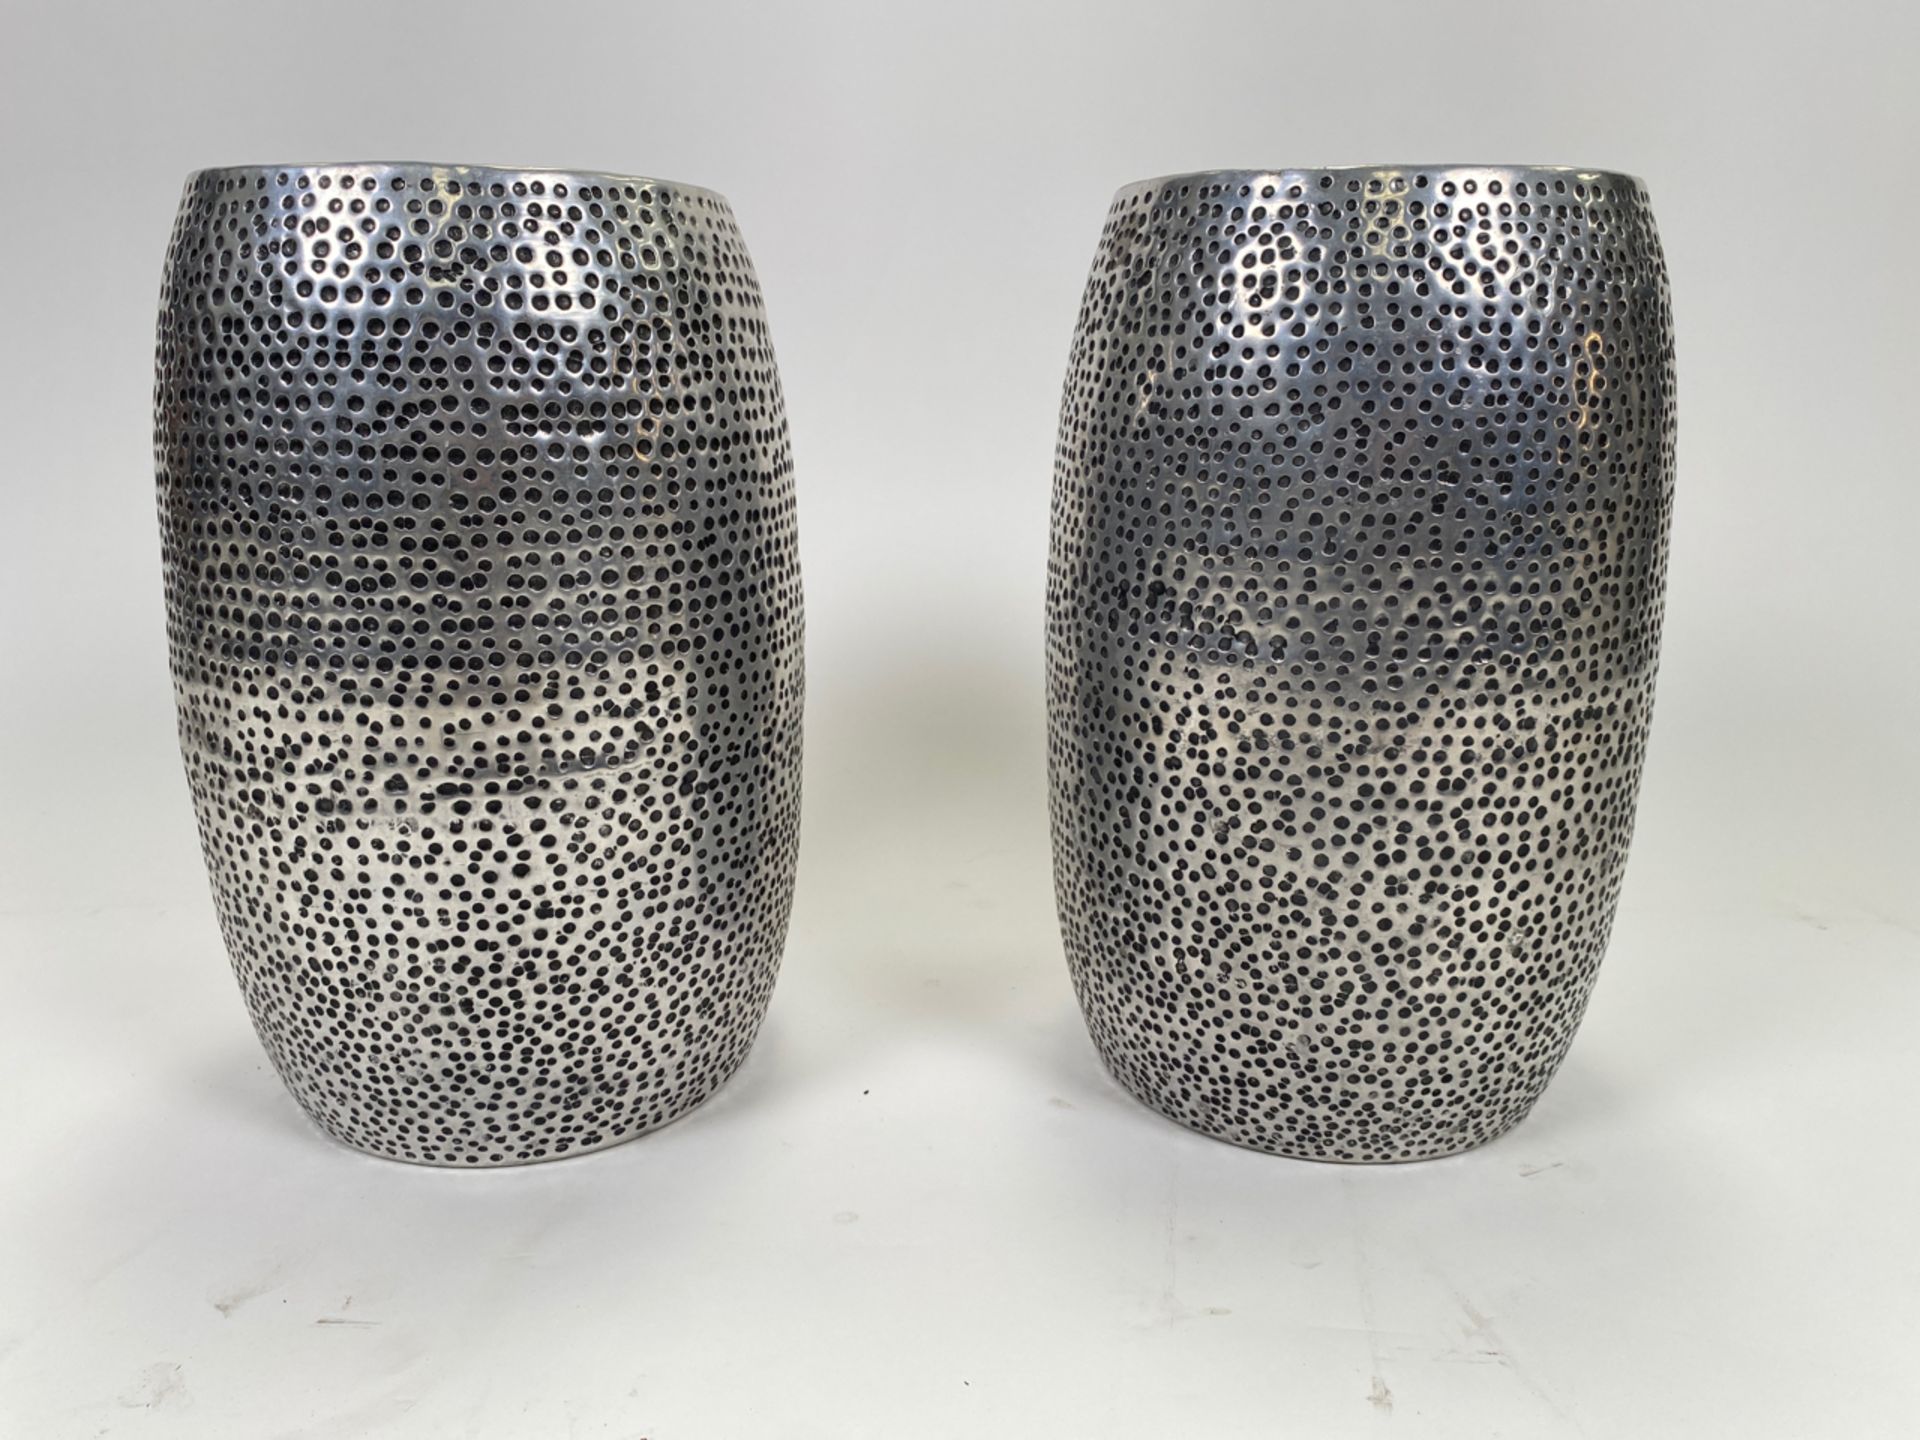 Pair of Speckled Plant Pots